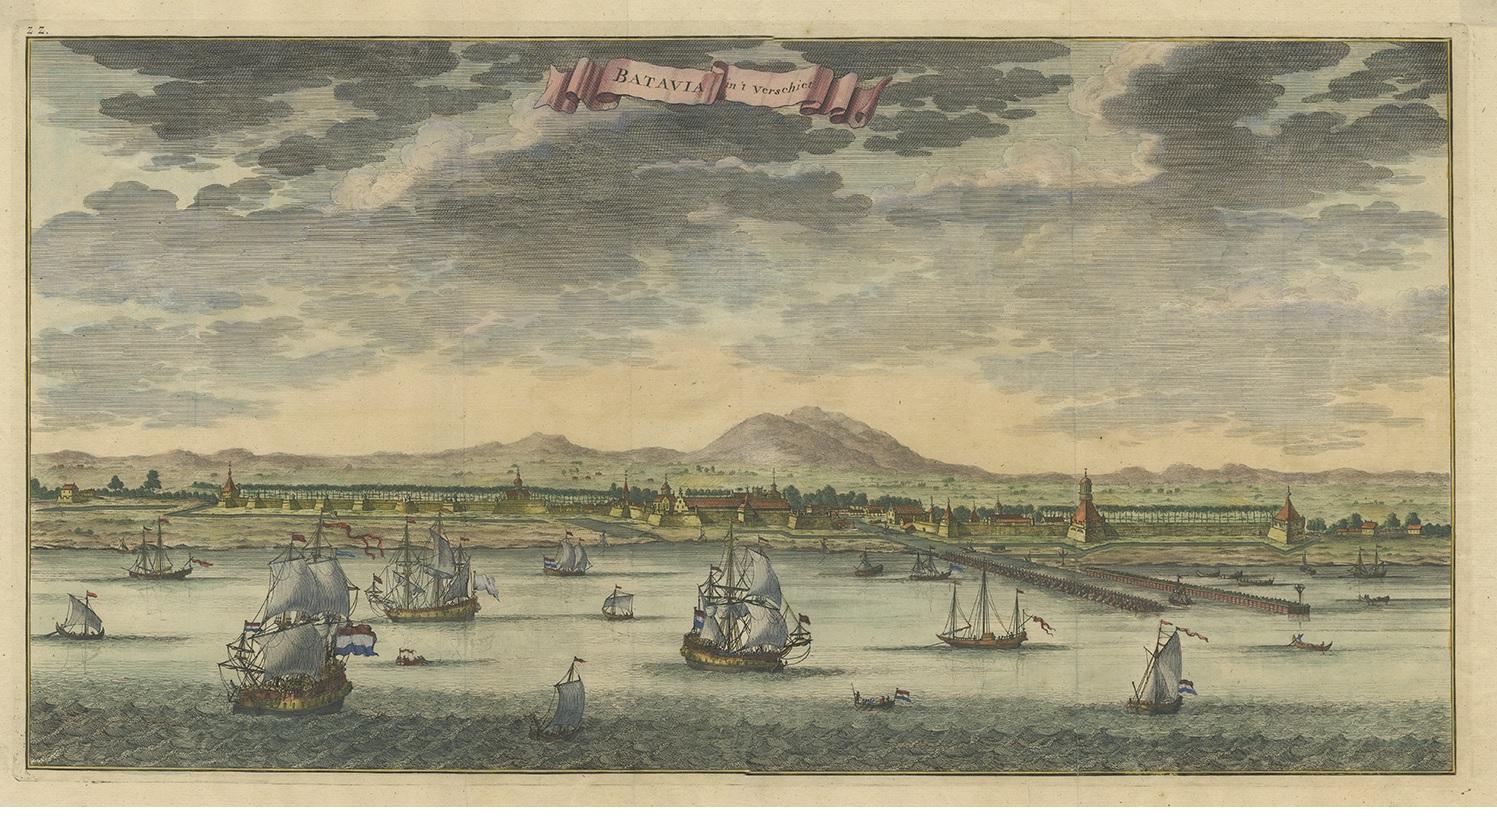 Antique print Indonesia titled 'Batavia in 't Verschiet'. Large panoramic view on Batavia, present day Jakarta, Indonesia. Originates from 'Oud en Nieuw Oost-Indiën (..)' by François Valentyn / Valentijn, published in 1724-1726.